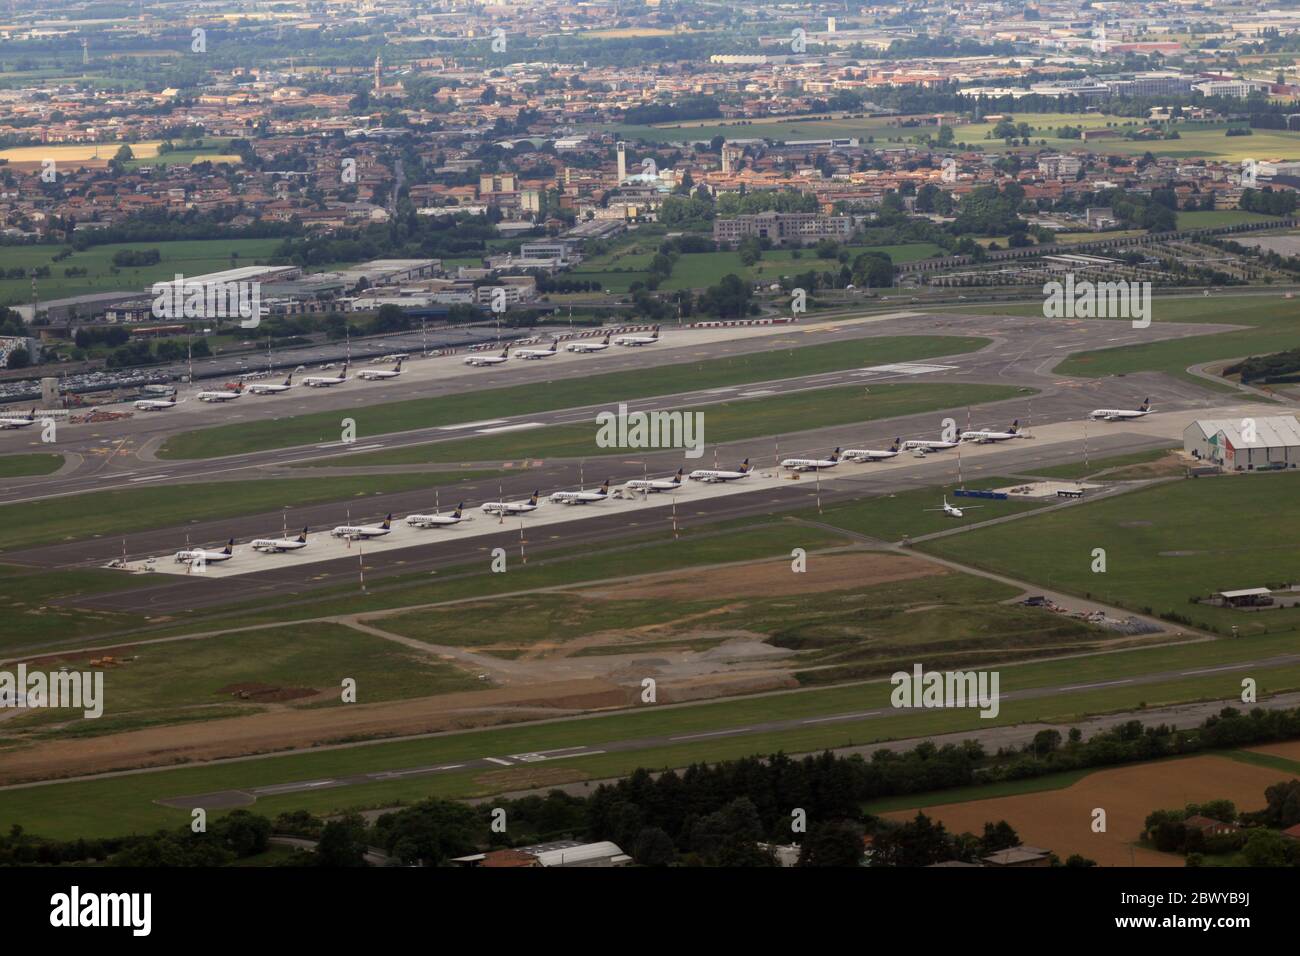 Aerial view of Bergamo airport, which is a Ryanair hub. Dozens of grounded planes line up in Bergamo (LIME/BGY) International Airport due to lockdown measures for coronavirus 2019. The airport itself closed and air traffic is reduced. The planes are flown regularly to keep them airworthy. Stock Photo